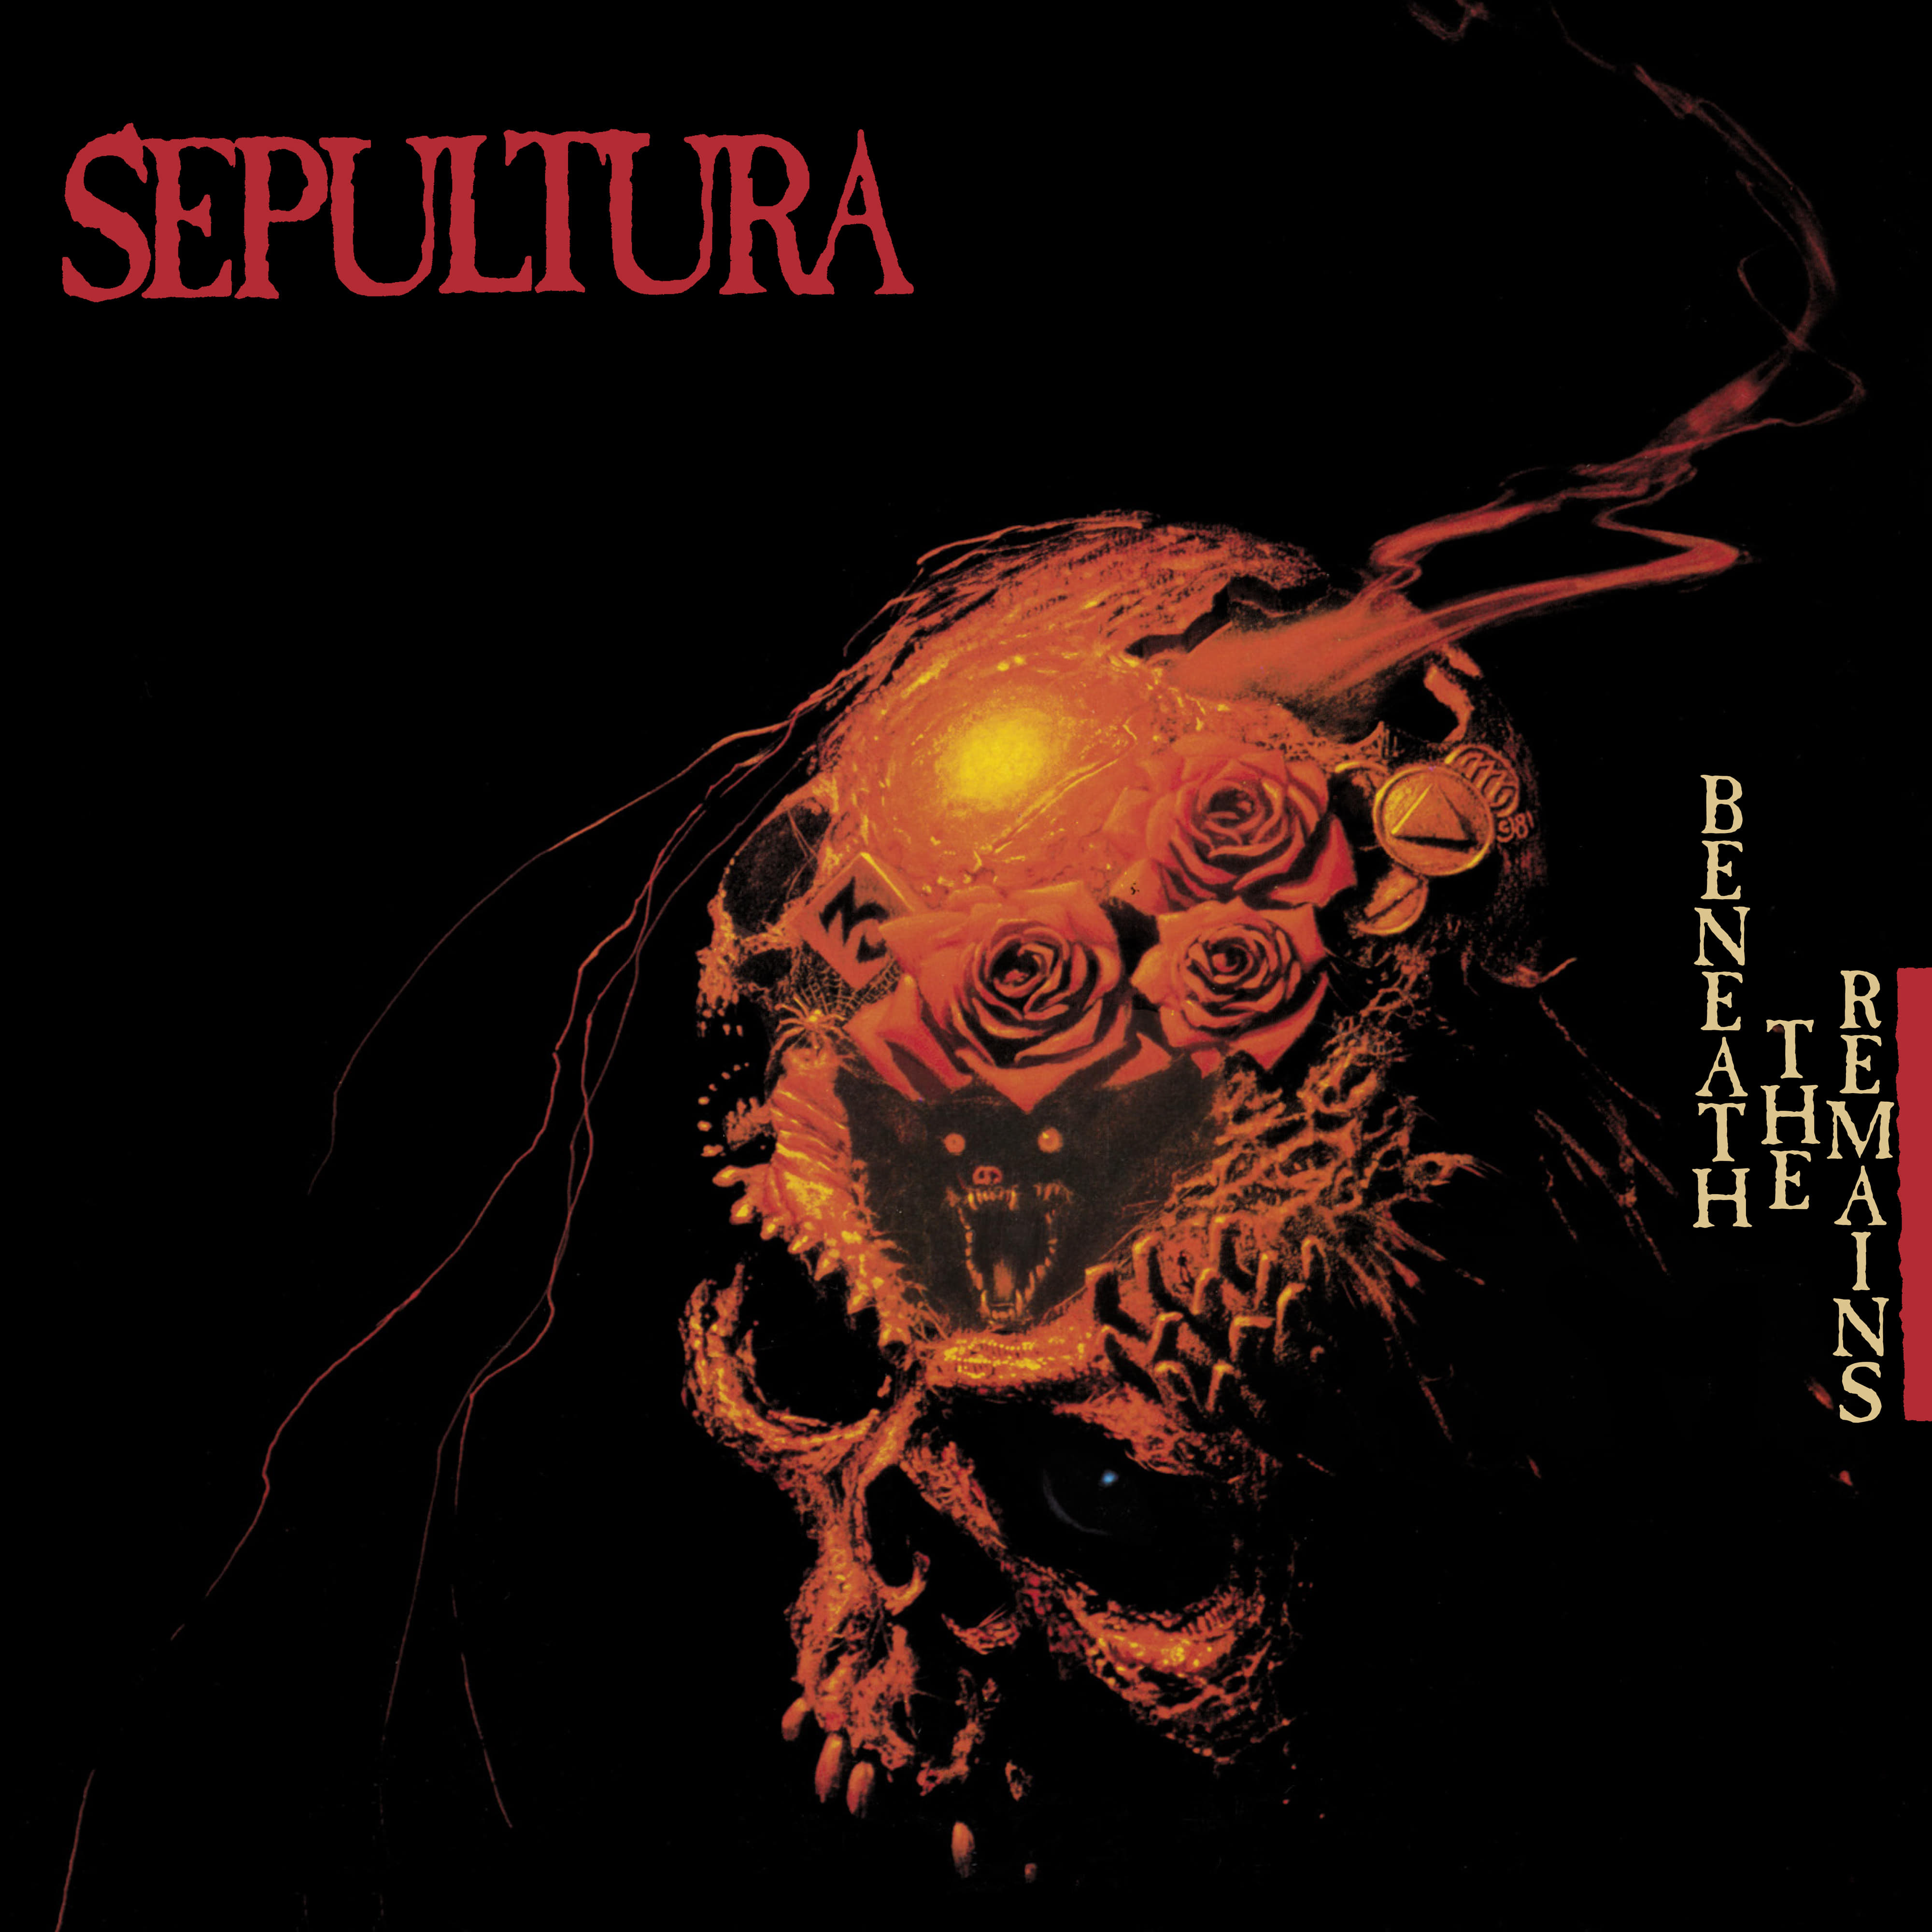 Sepultura-Stronger Than Hate (Mixdown) [Instrumental]